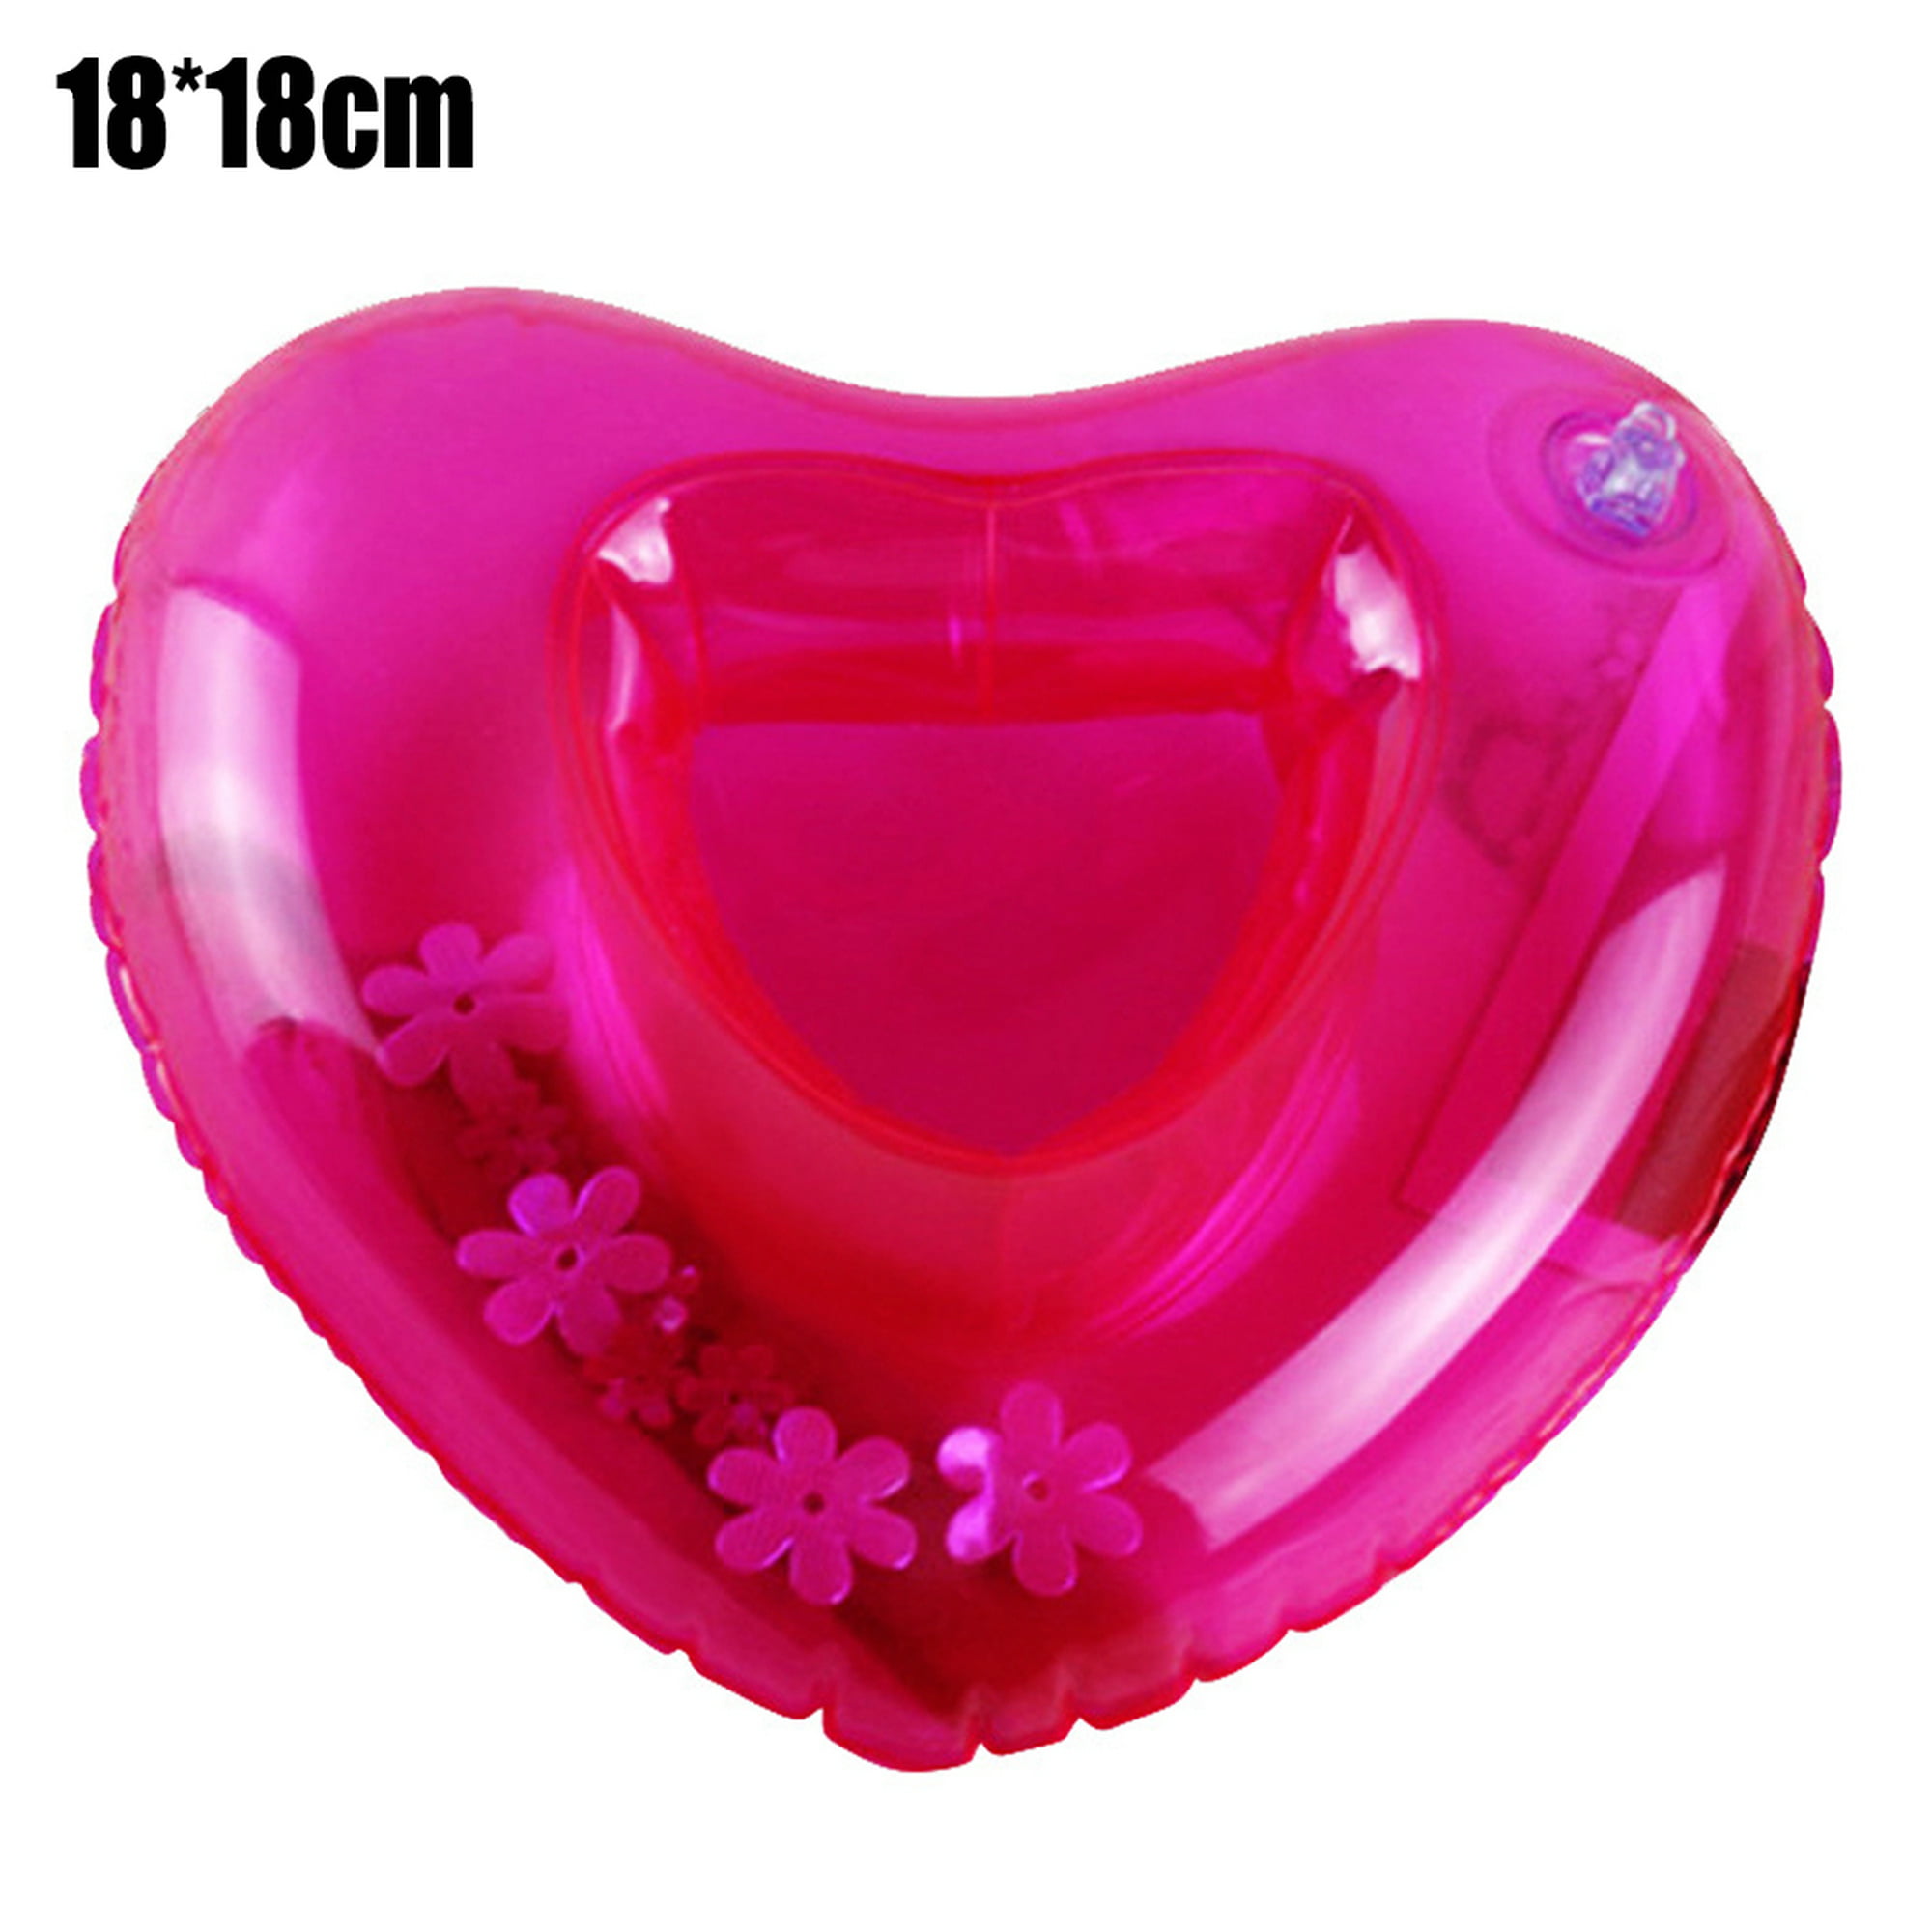 Inflatable Cup Holder Drinks Floating Beach Pool Party Can Swimming Tub Toy Tu8 